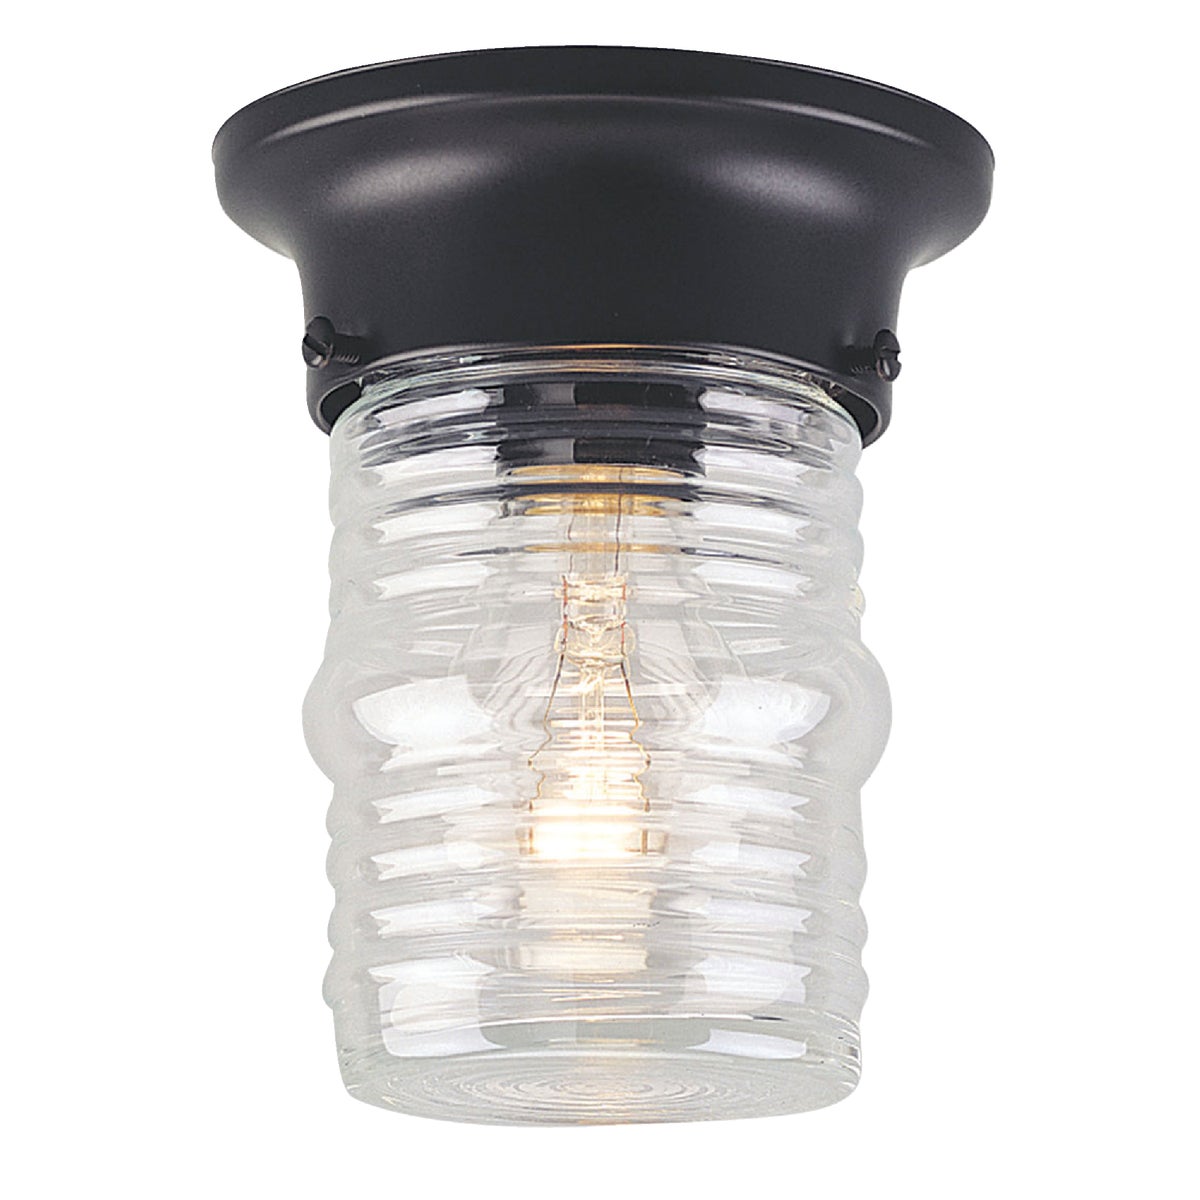 Item 516996, Outdoor porch light with clear glass.